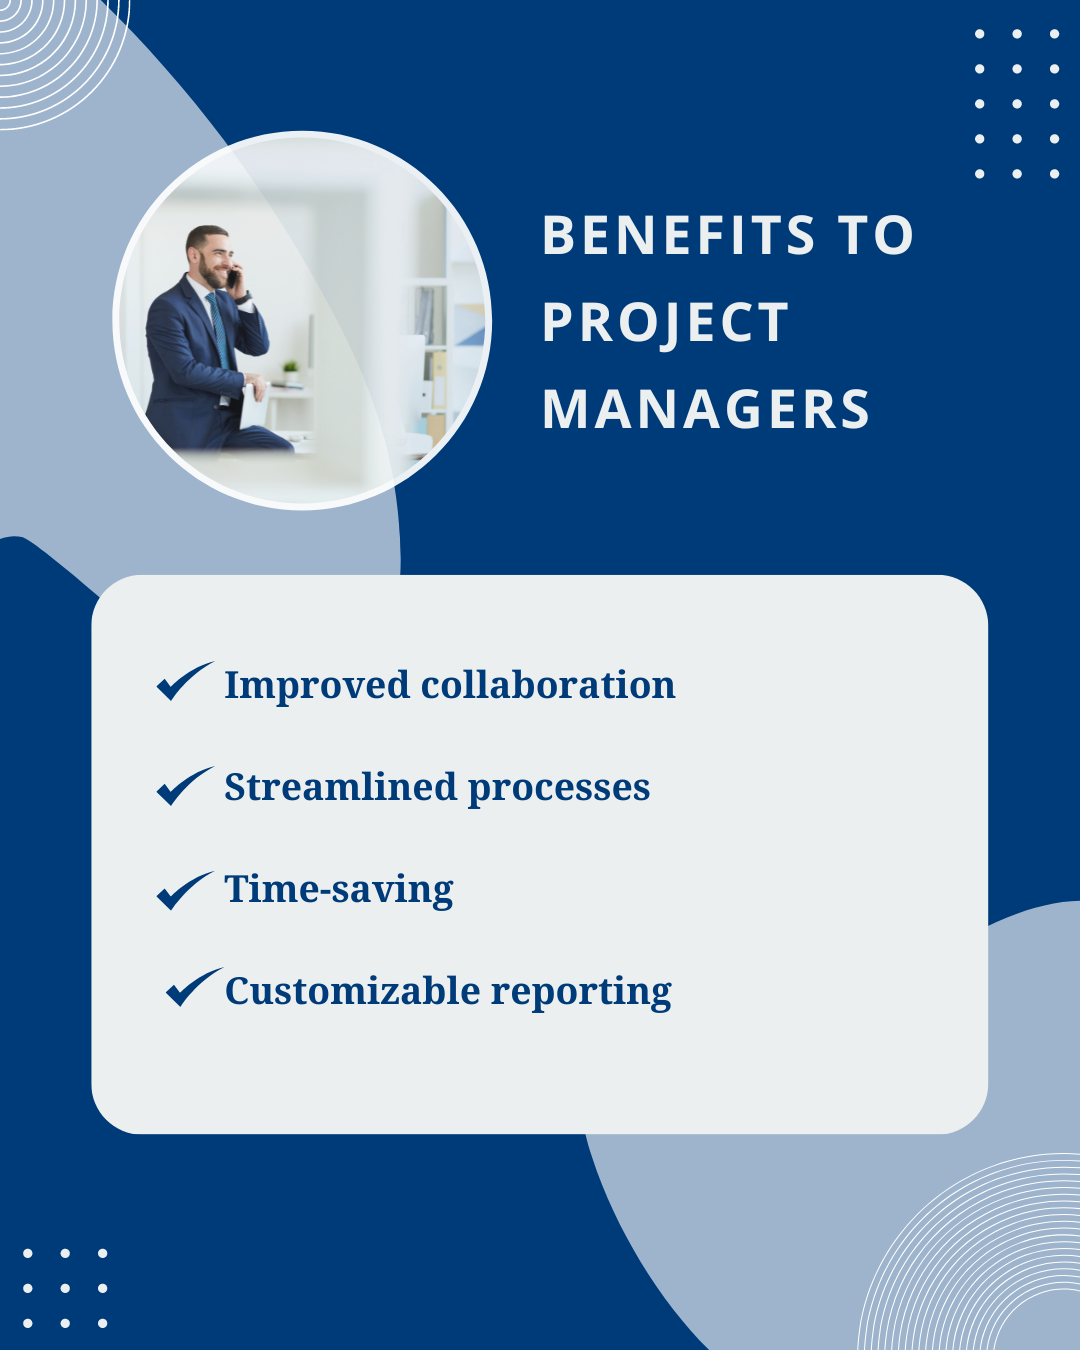 Benefits to Project Managers